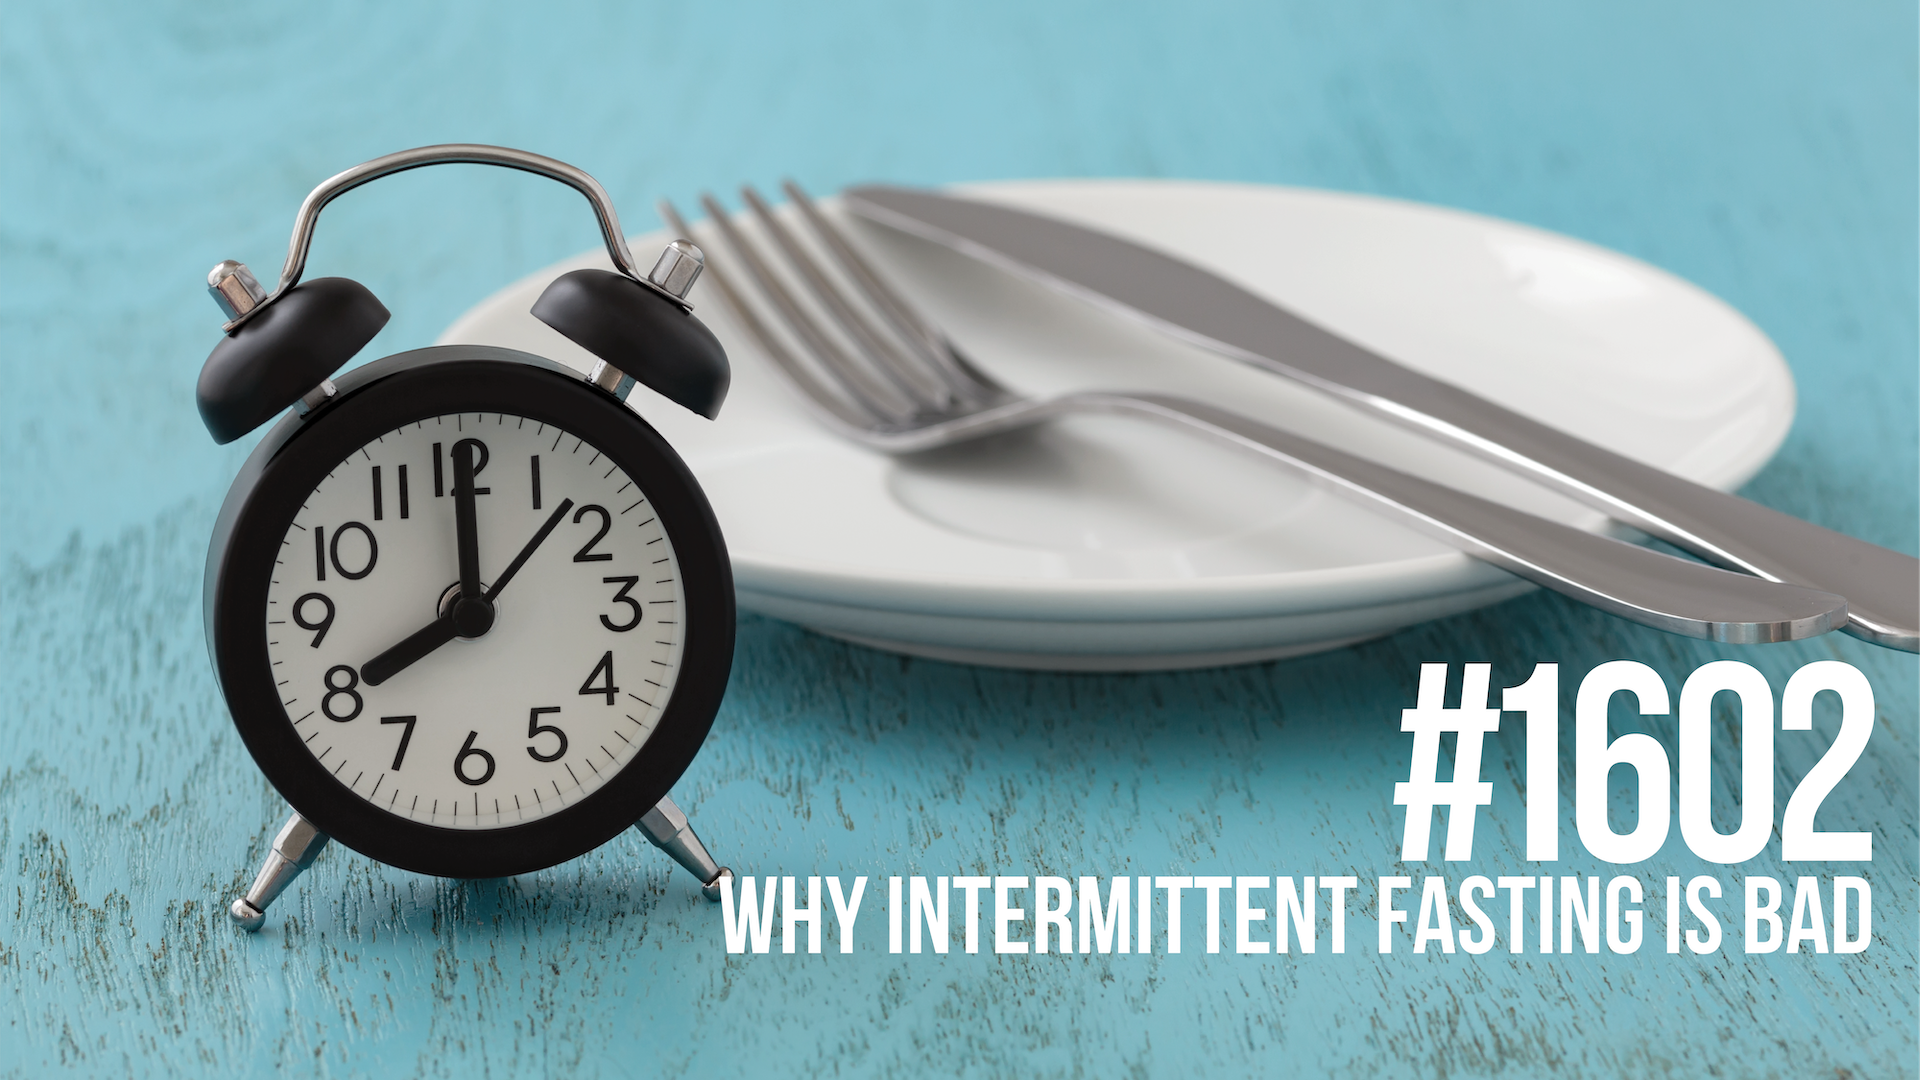 1602: Why Intermittent Fasting is Bad